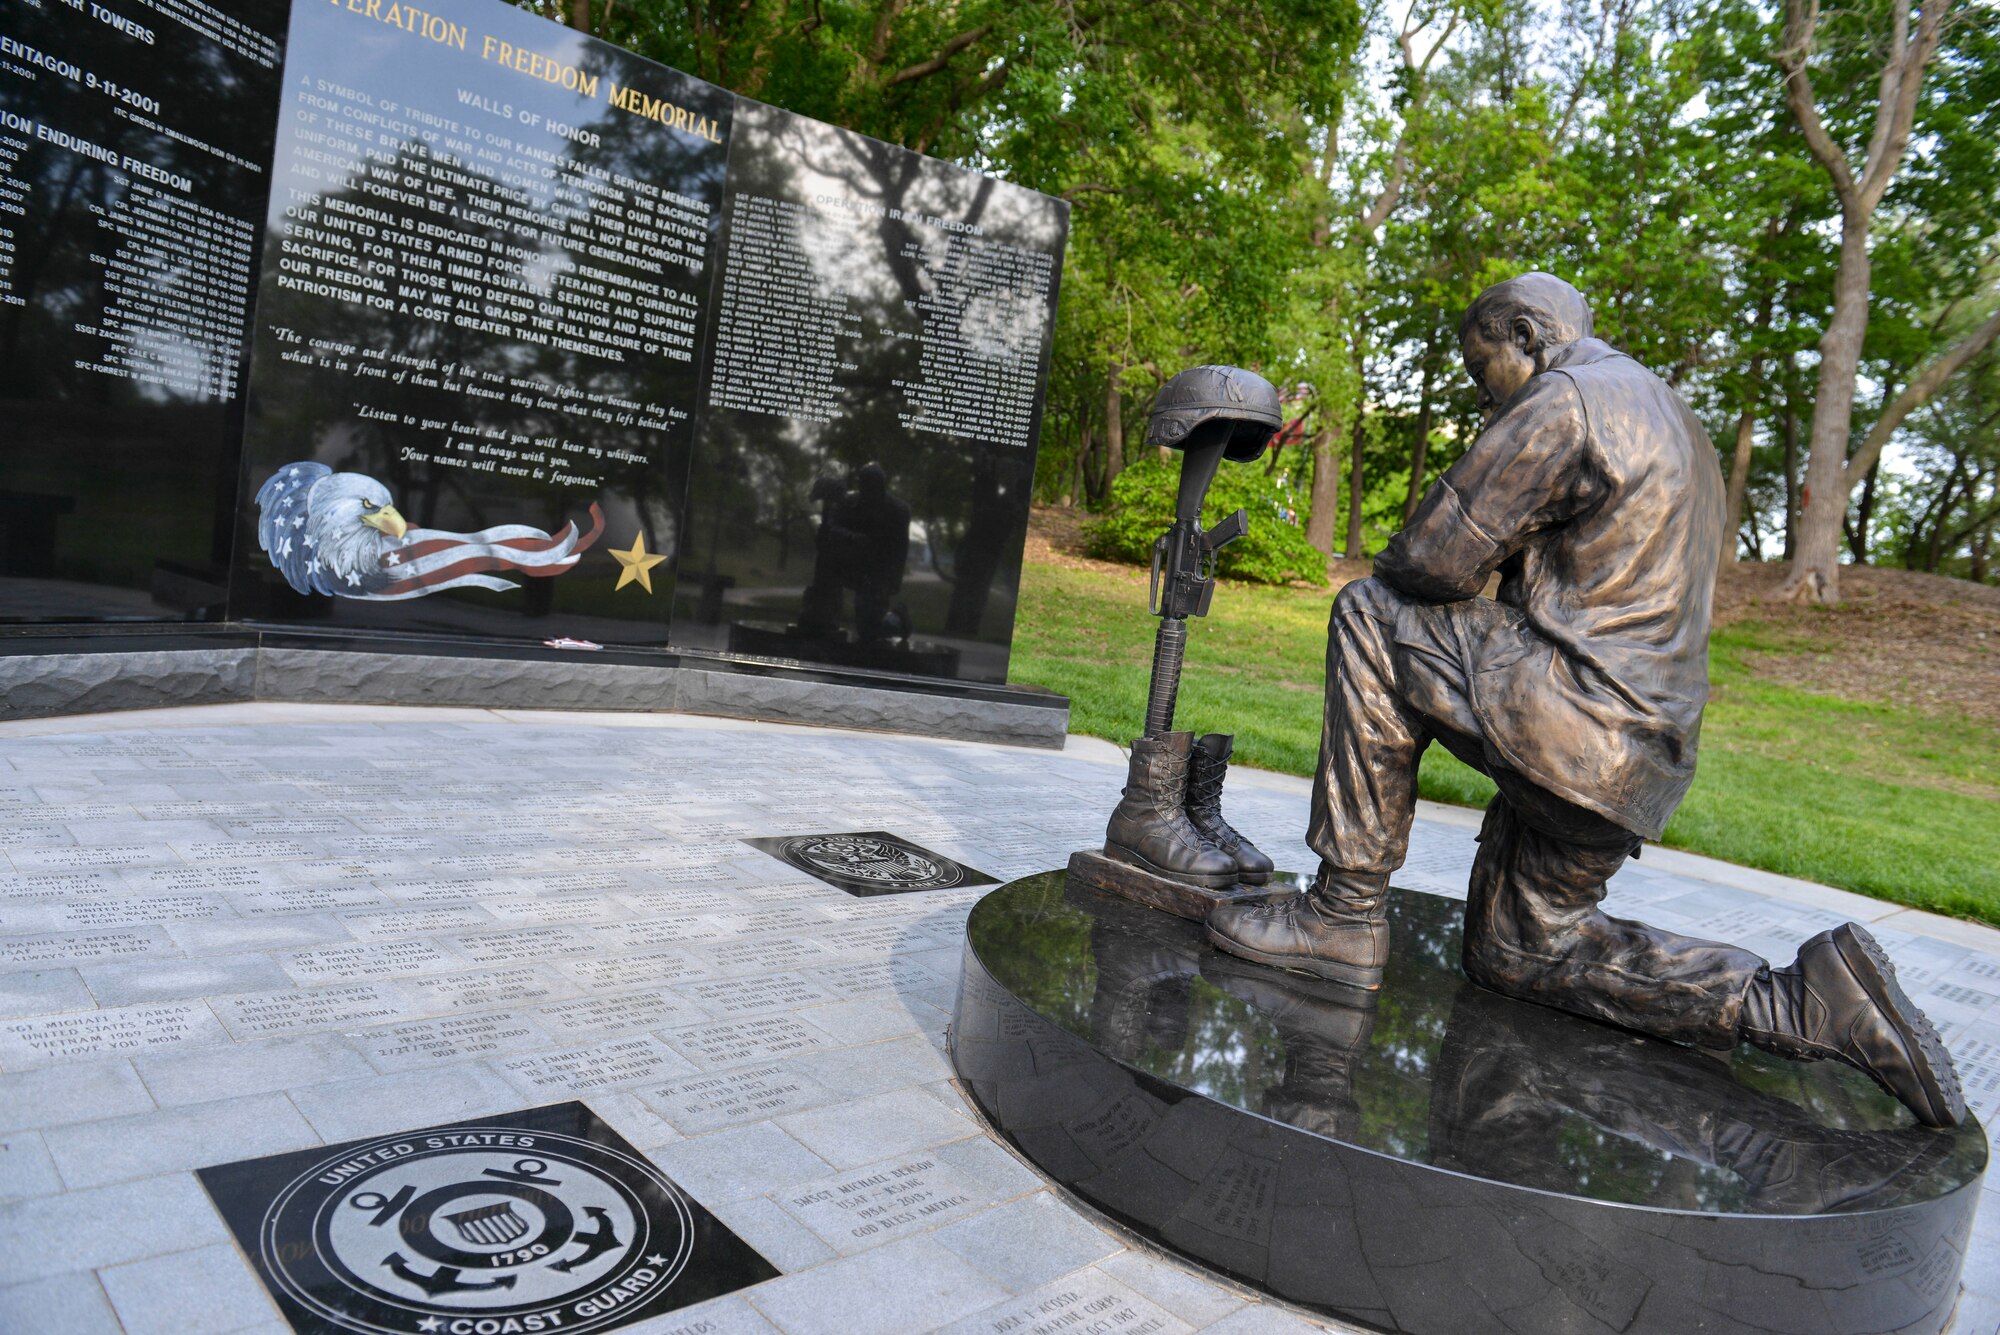 The Operation Freedom Memorial sits among many other war memorials in the Veteran’s Memorial Park, May, 18, 2014, in Wichita, Kansas. The monument is a symbol of tribute to Kansas fallen service members from Operation Desert Storm to current, ongoing conflicts in the war on terrorism. The gray, granite floor pavers contain the names of people serve or have served in the military. (U.S. Air Force photo/Staff Sgt. Jess Lockoski)